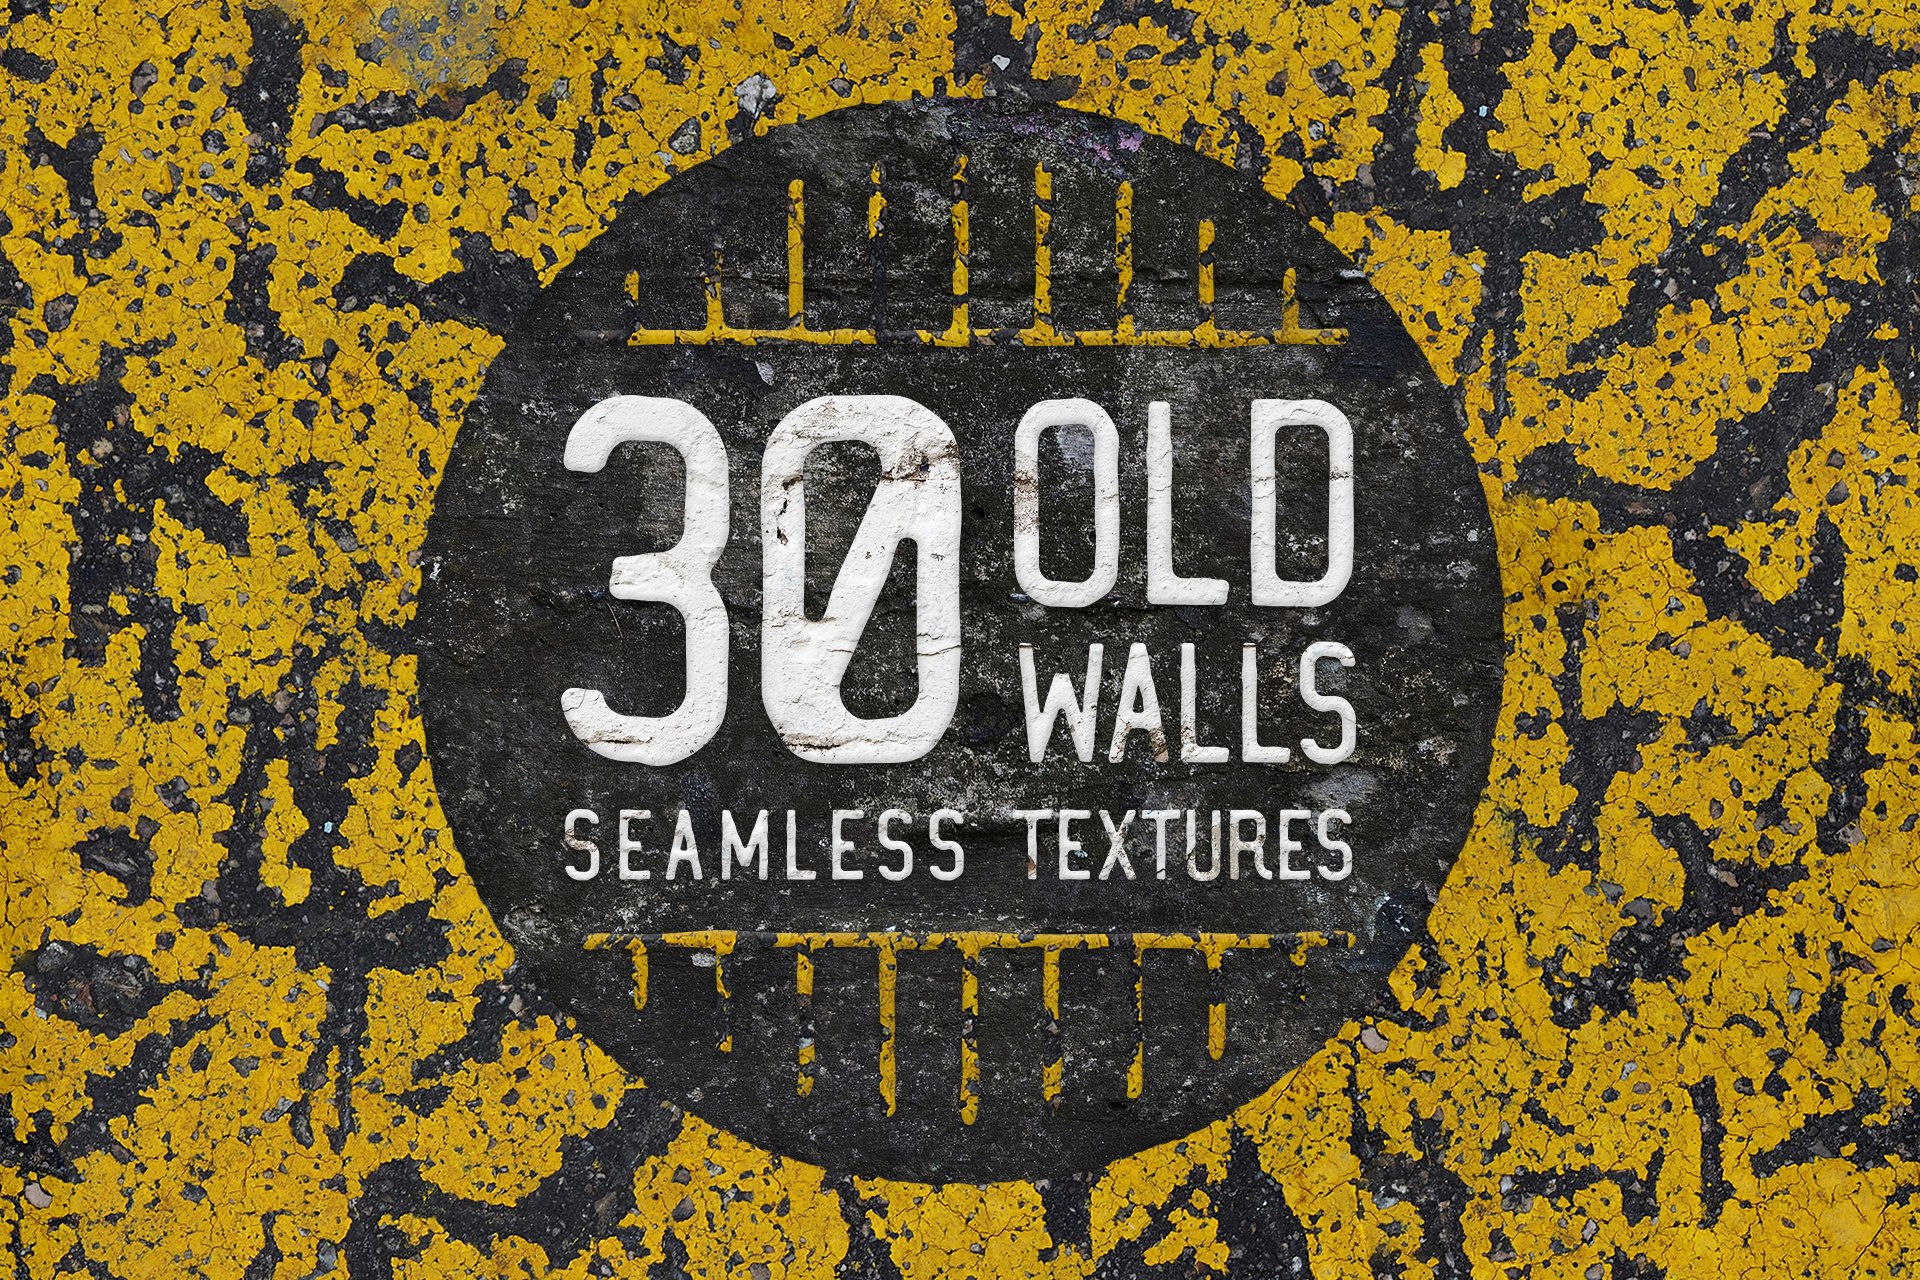 30 Old Walls Seamless Textures cover image.